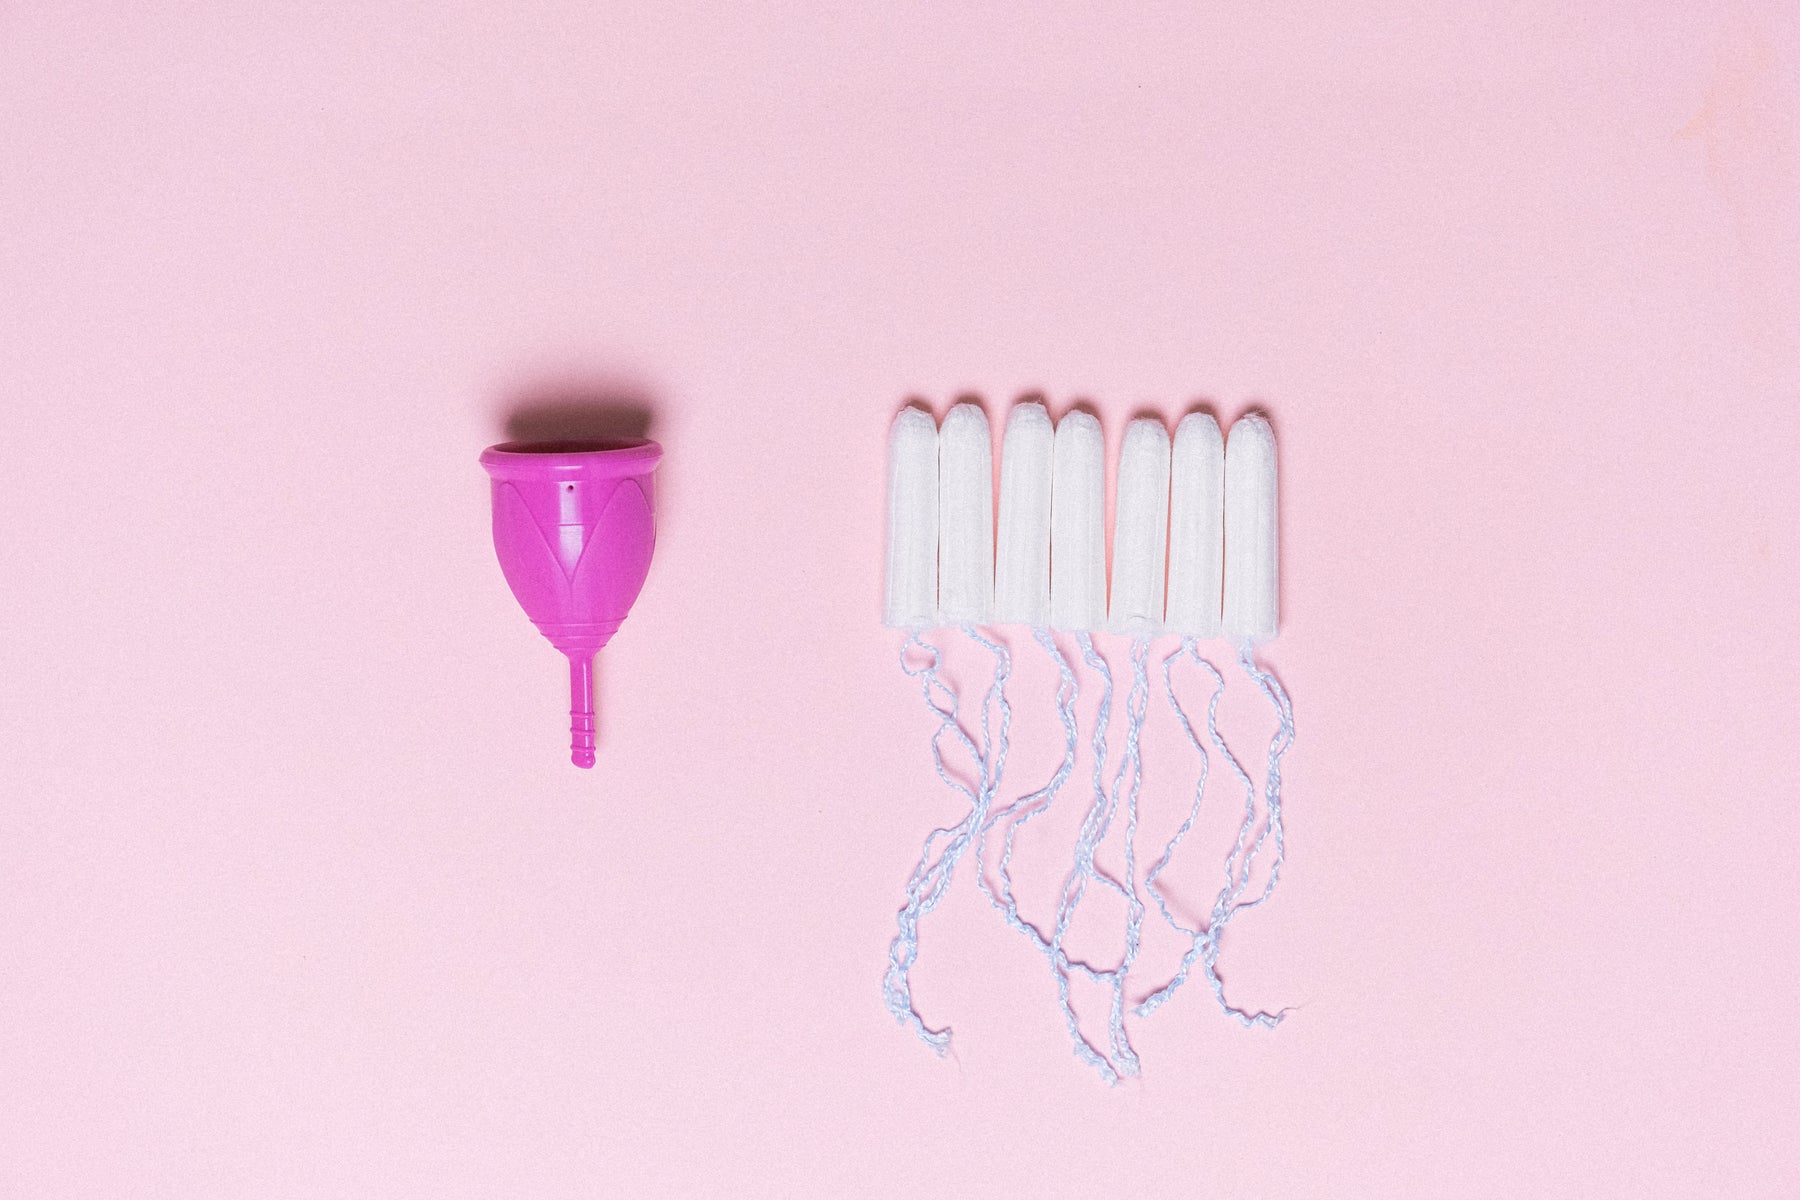 Busting Myths of 4 Inserted Period Products